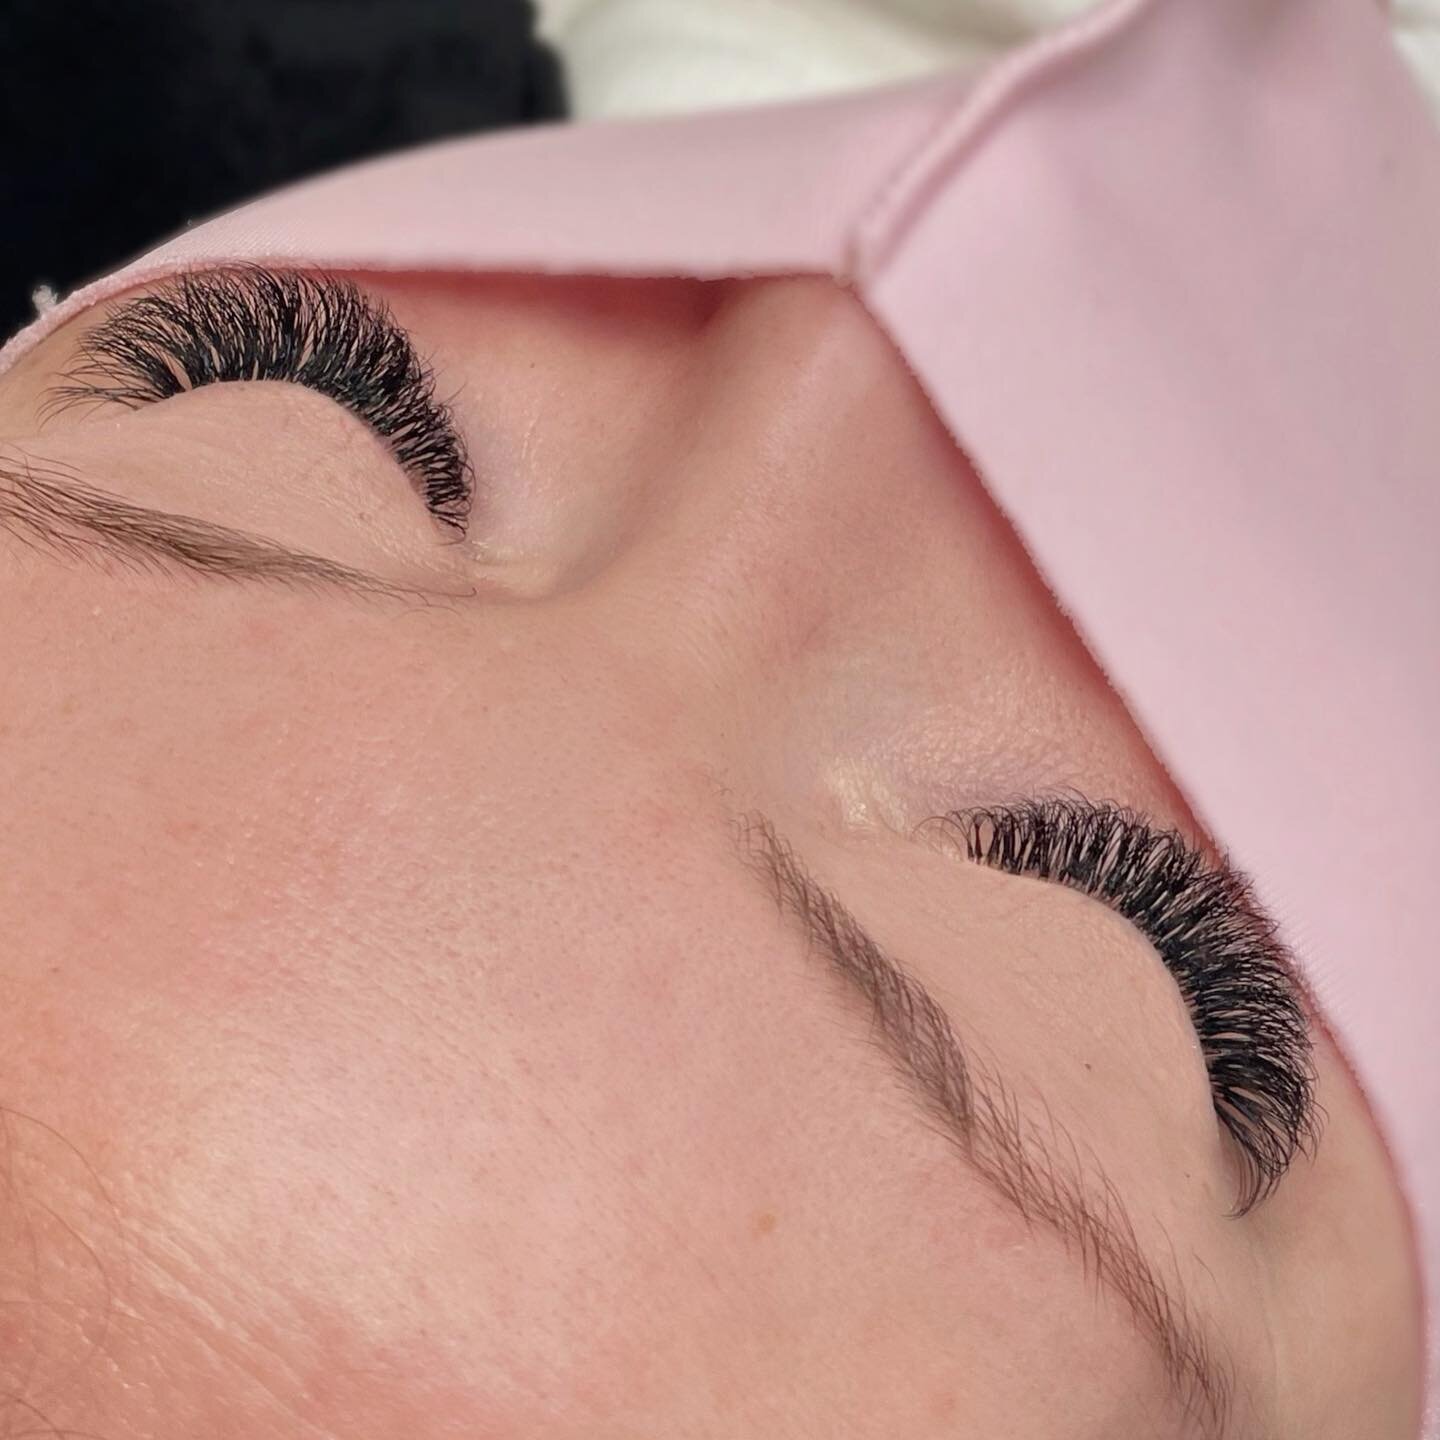 fluffy volumes &mdash; visit our website to book your appointments, www.monicasbeautybar.com 

#lashextensions #volumelashes #minklashes #sugarlashpro